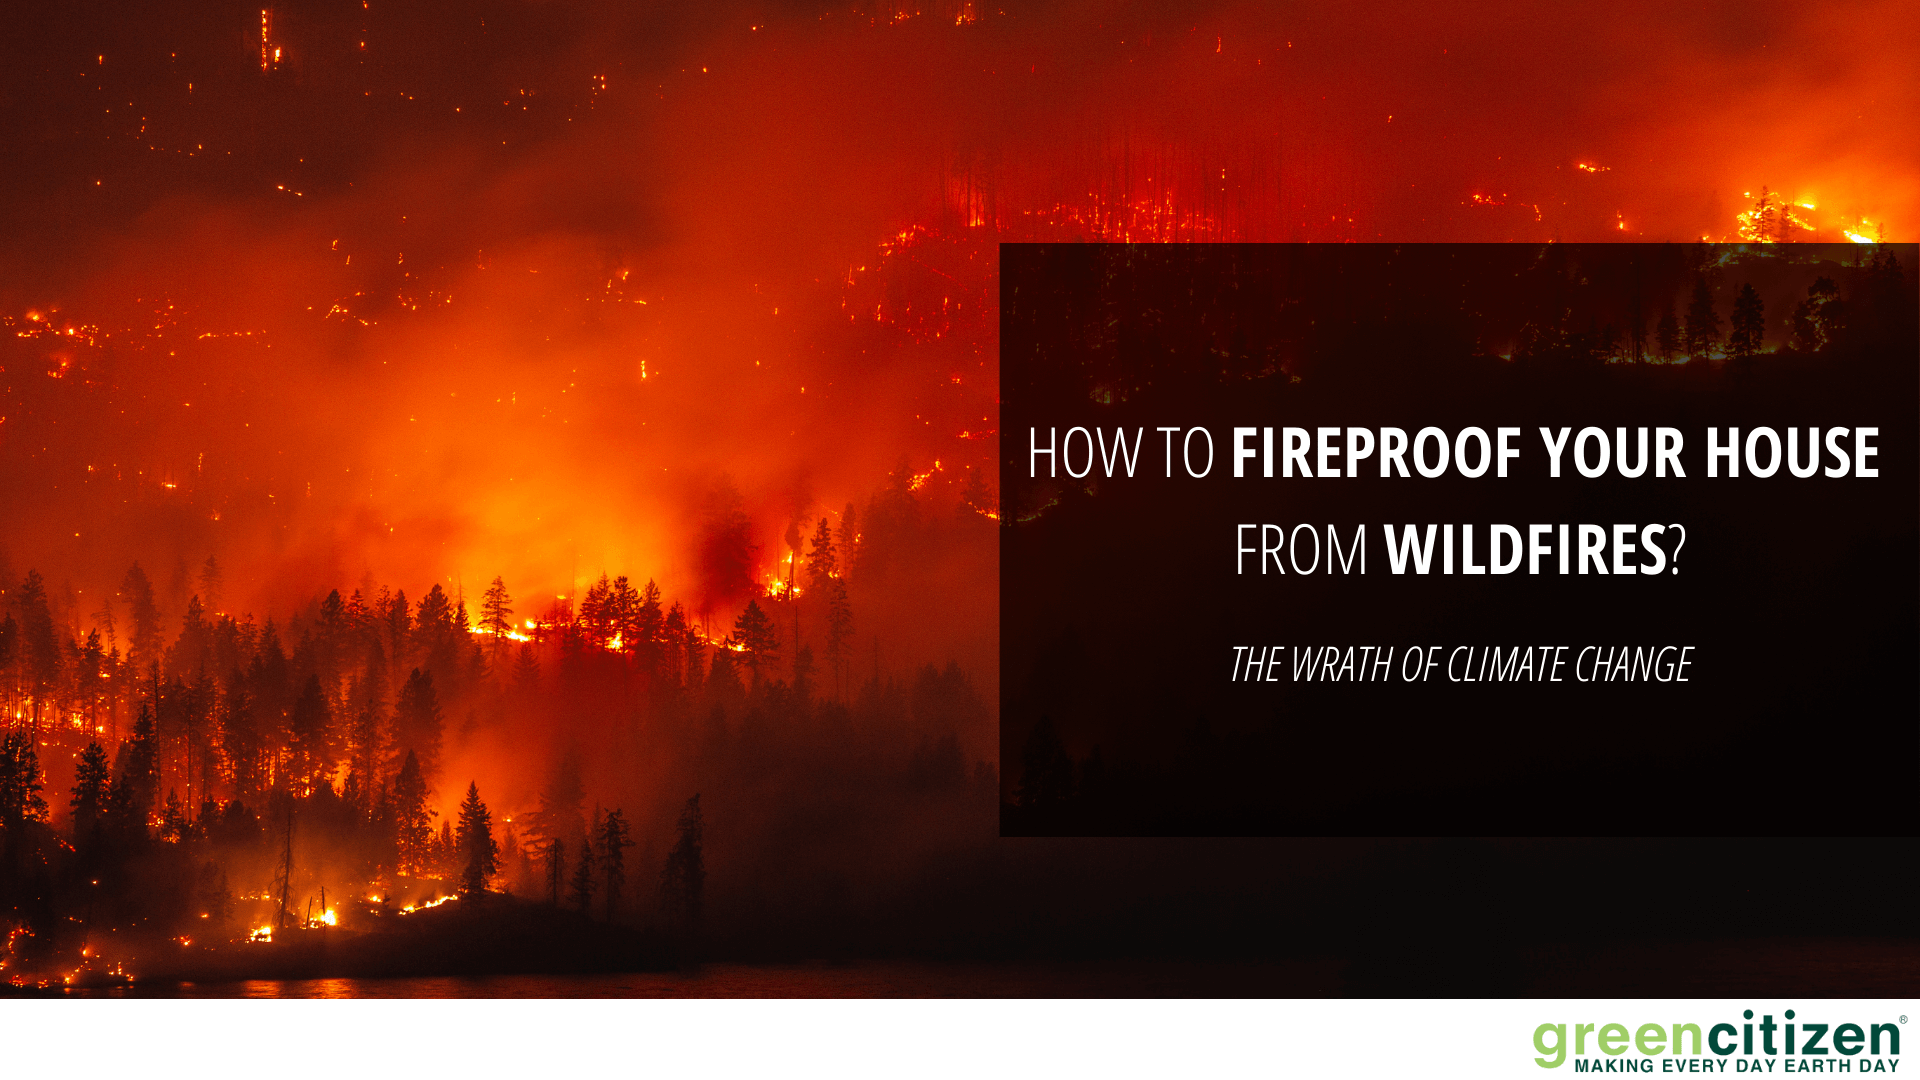 How to Fireproof Your House from Wildfires? - GreenCitizen